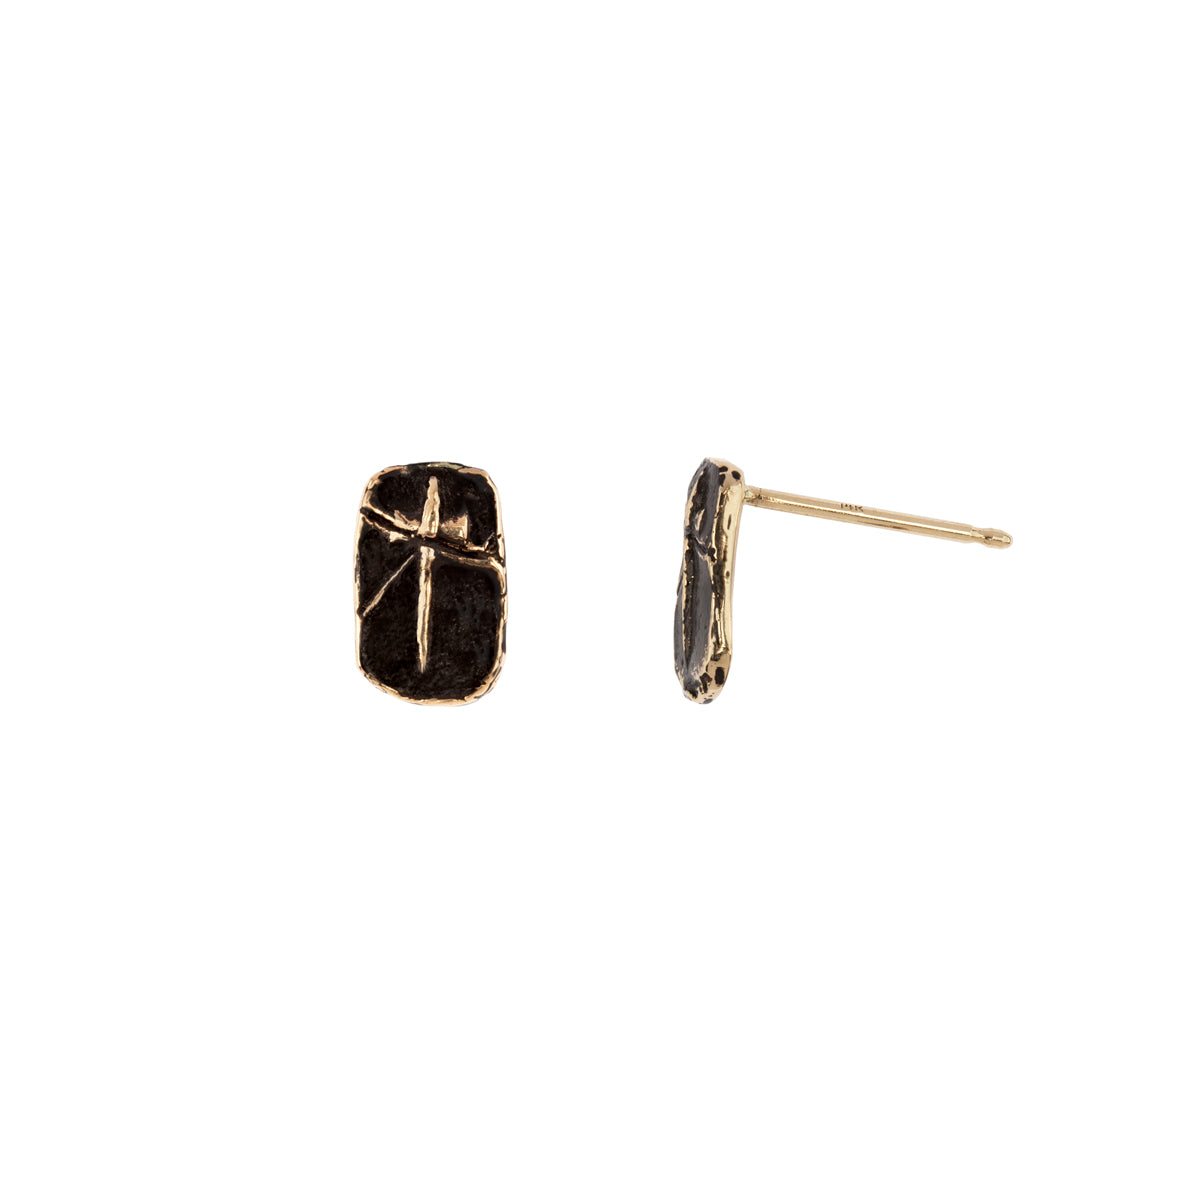 A set of 14k gold studs with our Dagger talisman.